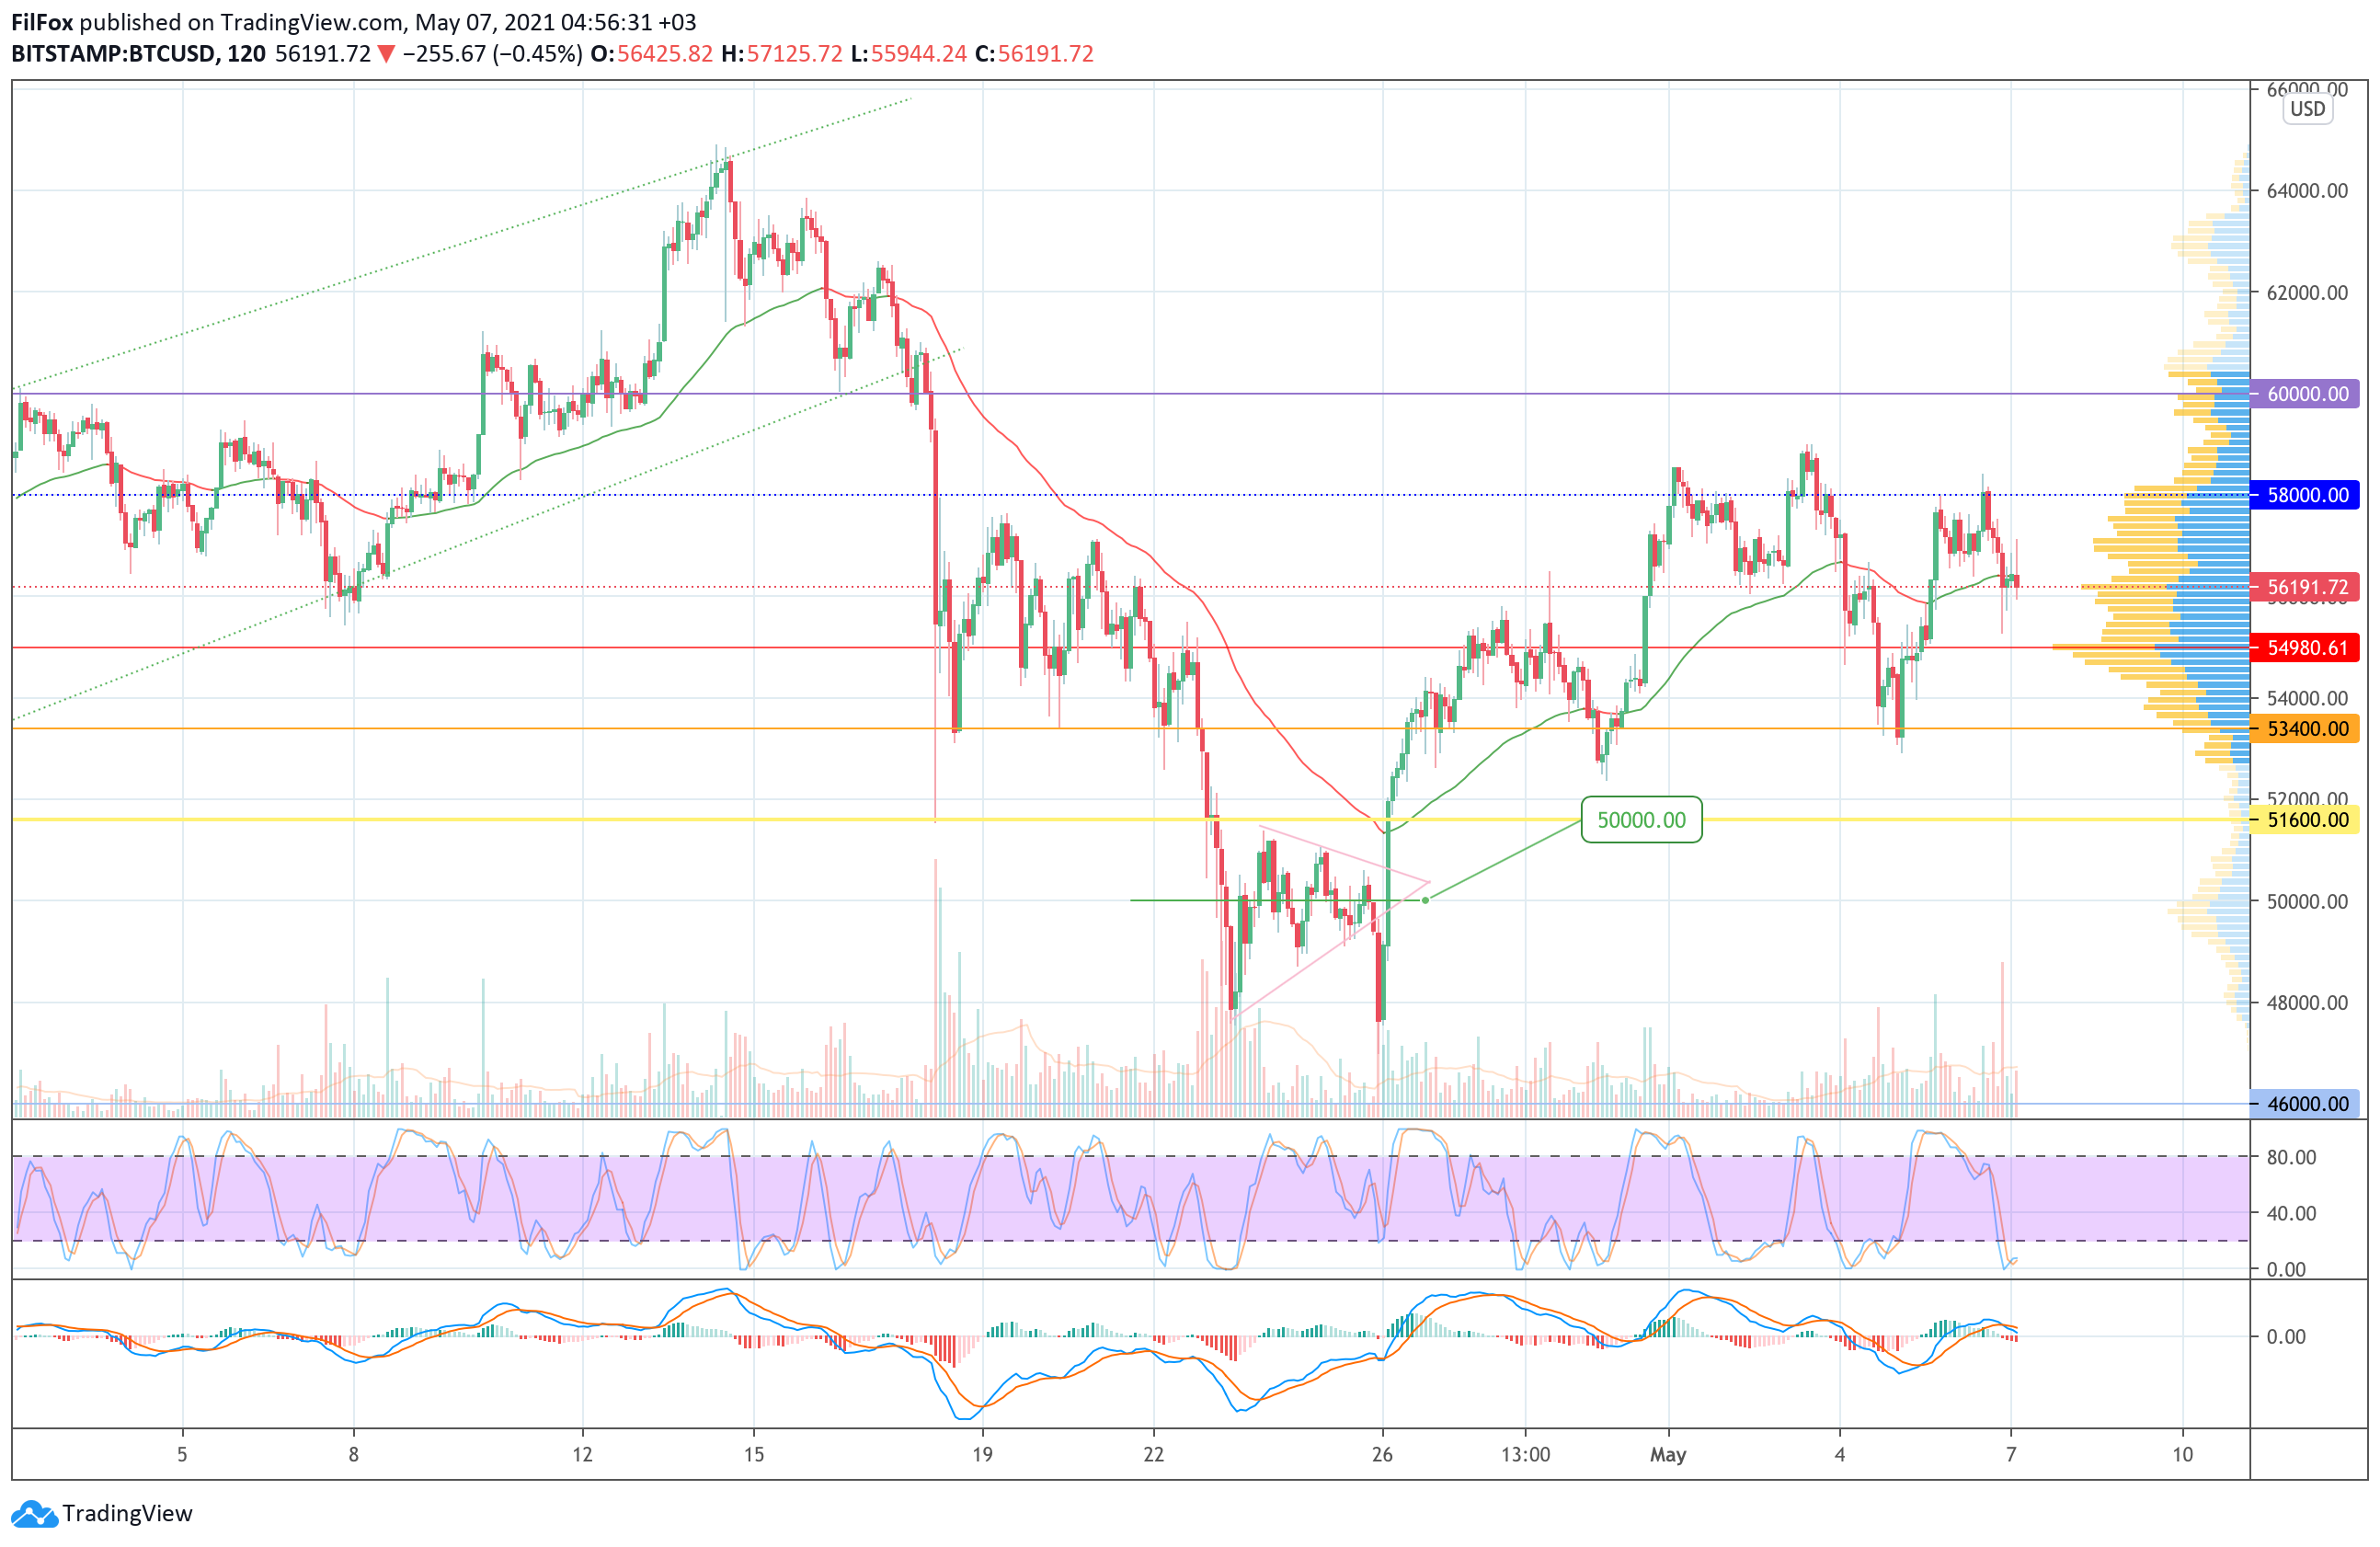 Analysis of the prices of Bitcoin, Ethereum, XRP for 05/07/2021